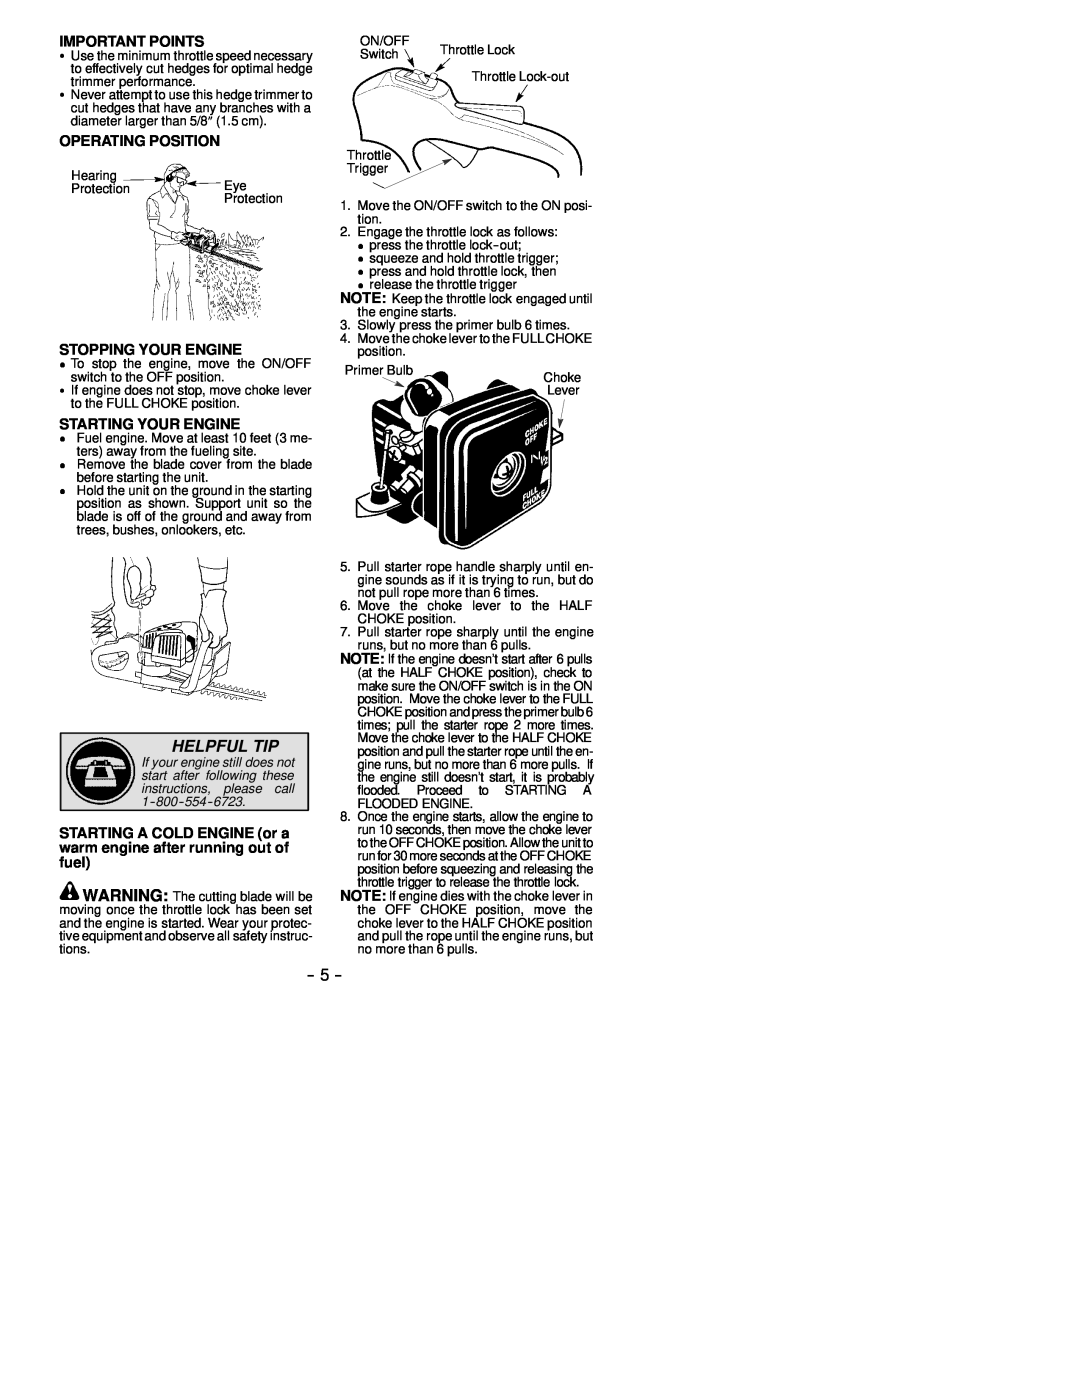 Sears 25 HHT Helpful Tip, Important Points, Operating Position, Stopping Your Engine, Starting Your Engine 